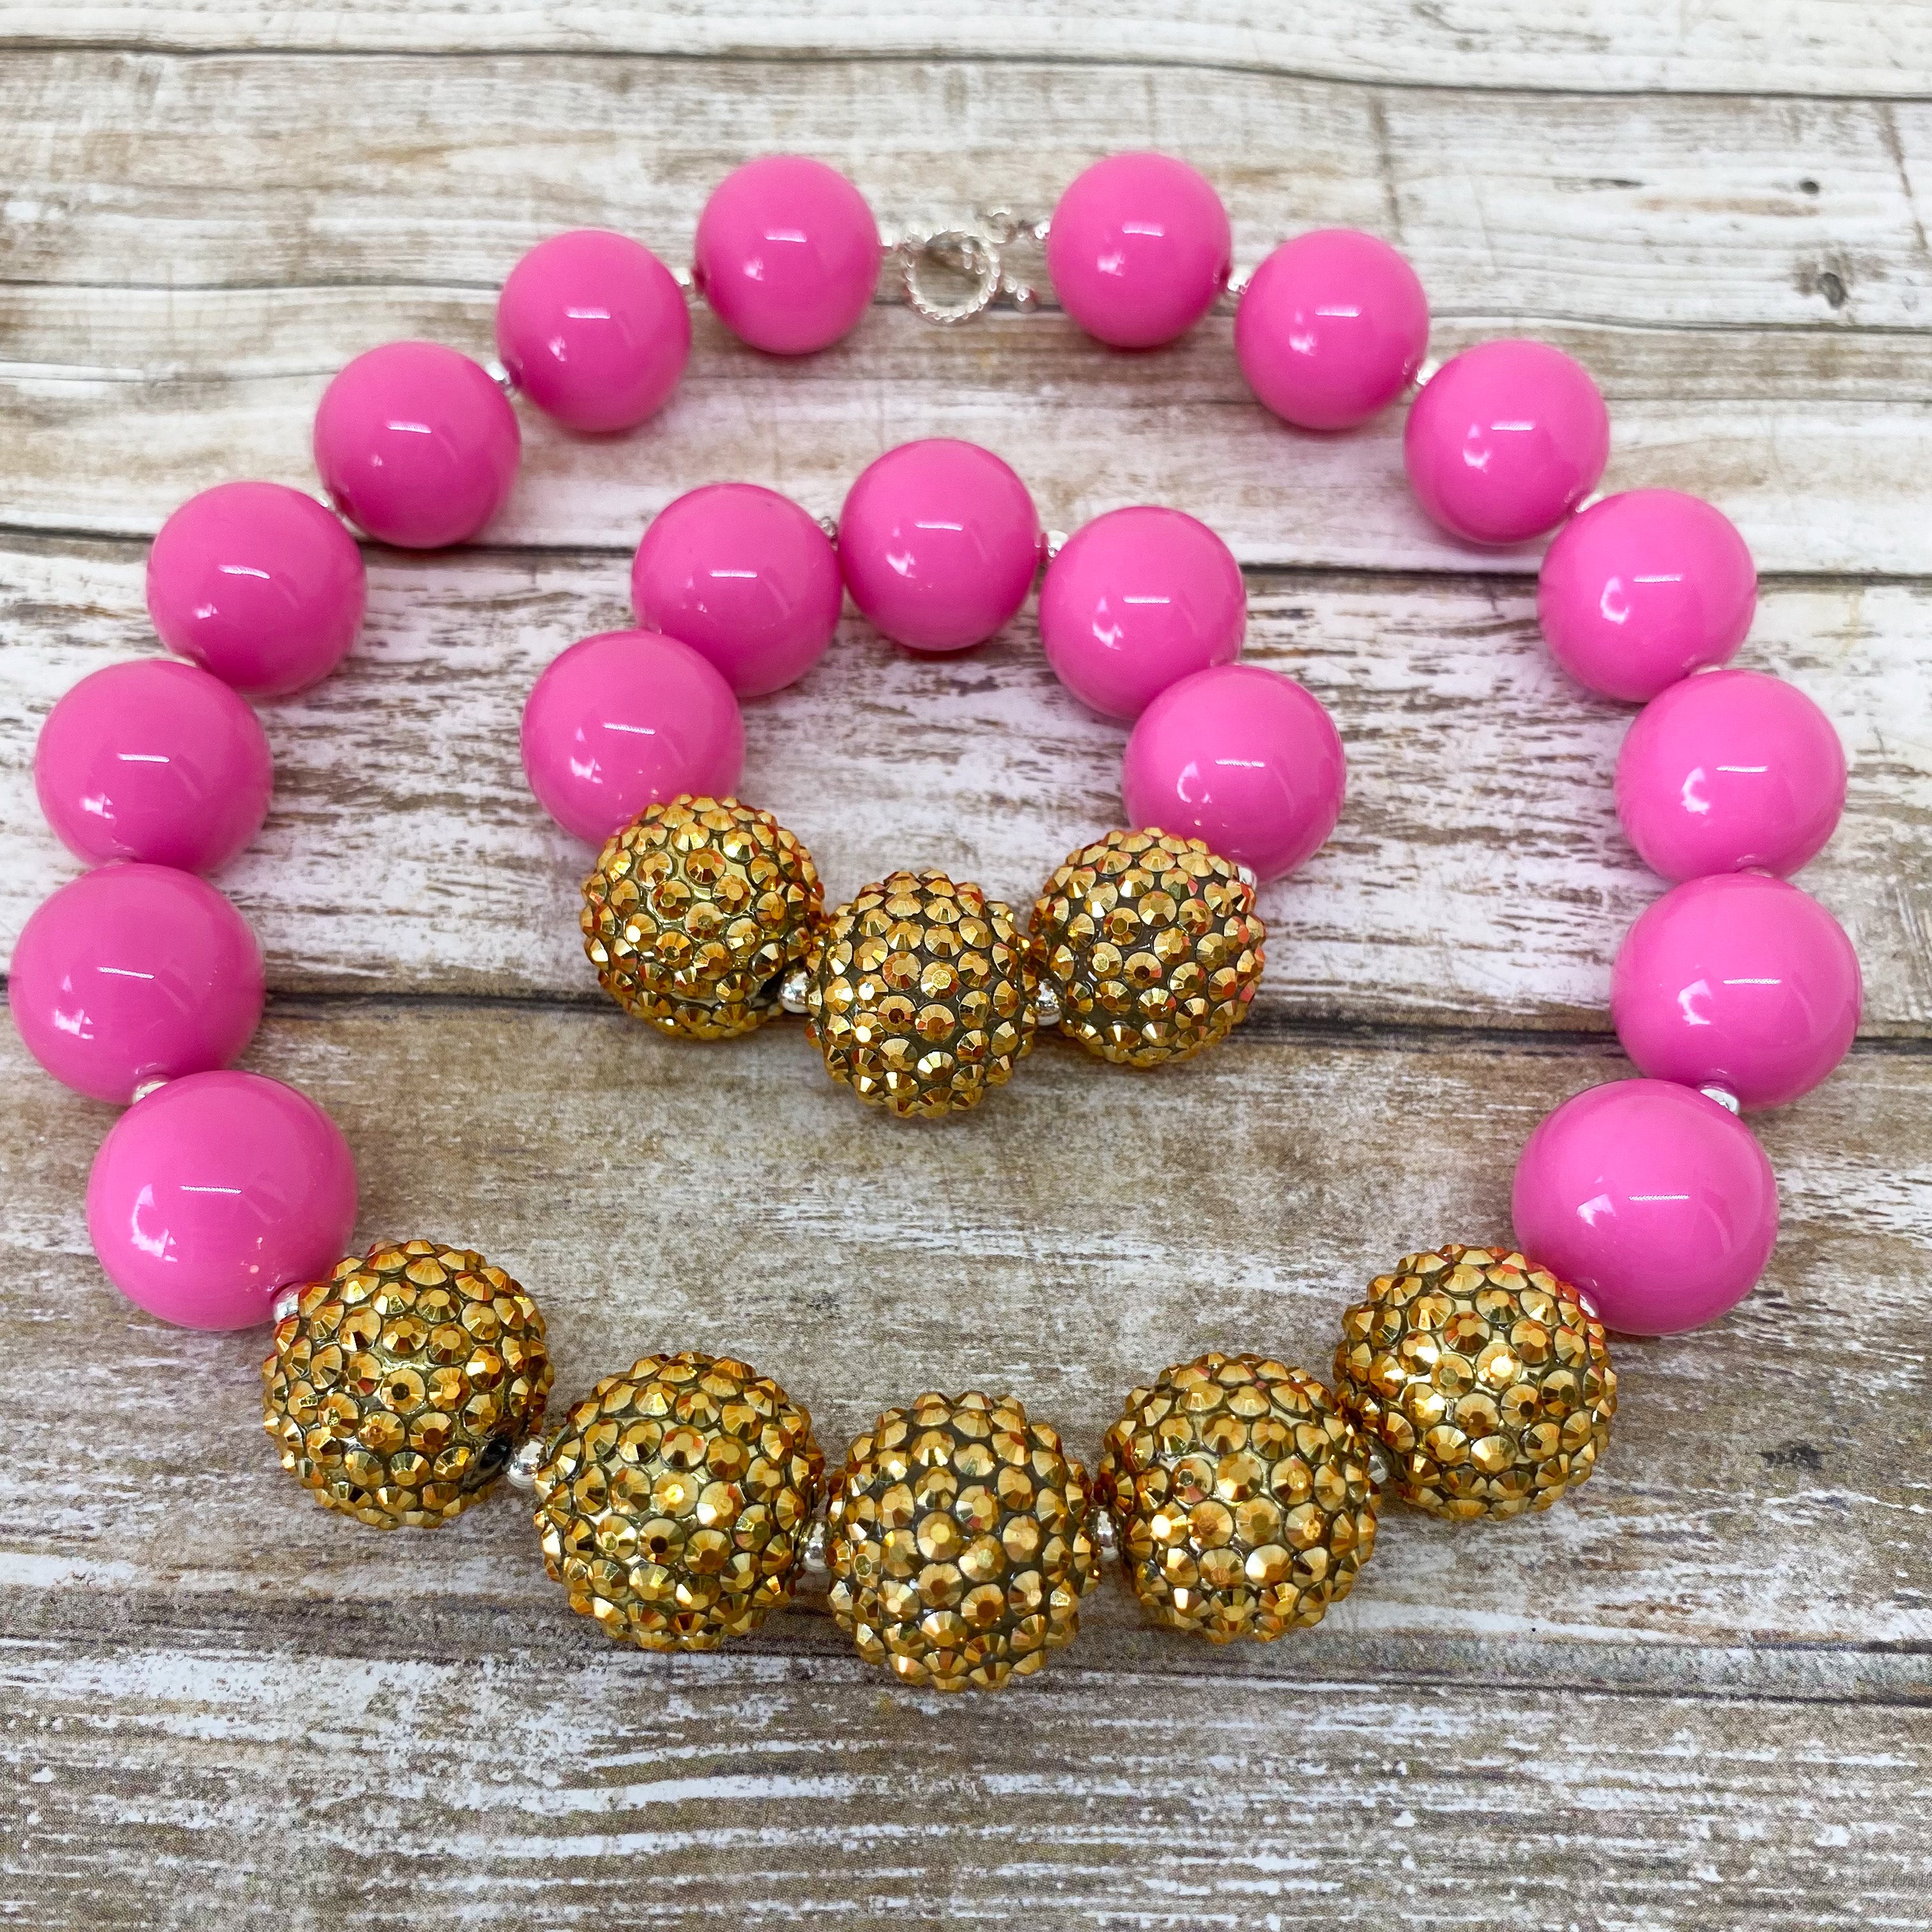 Buy Hot Pink and White Miracle Bead Bracelet Online in India - Etsy